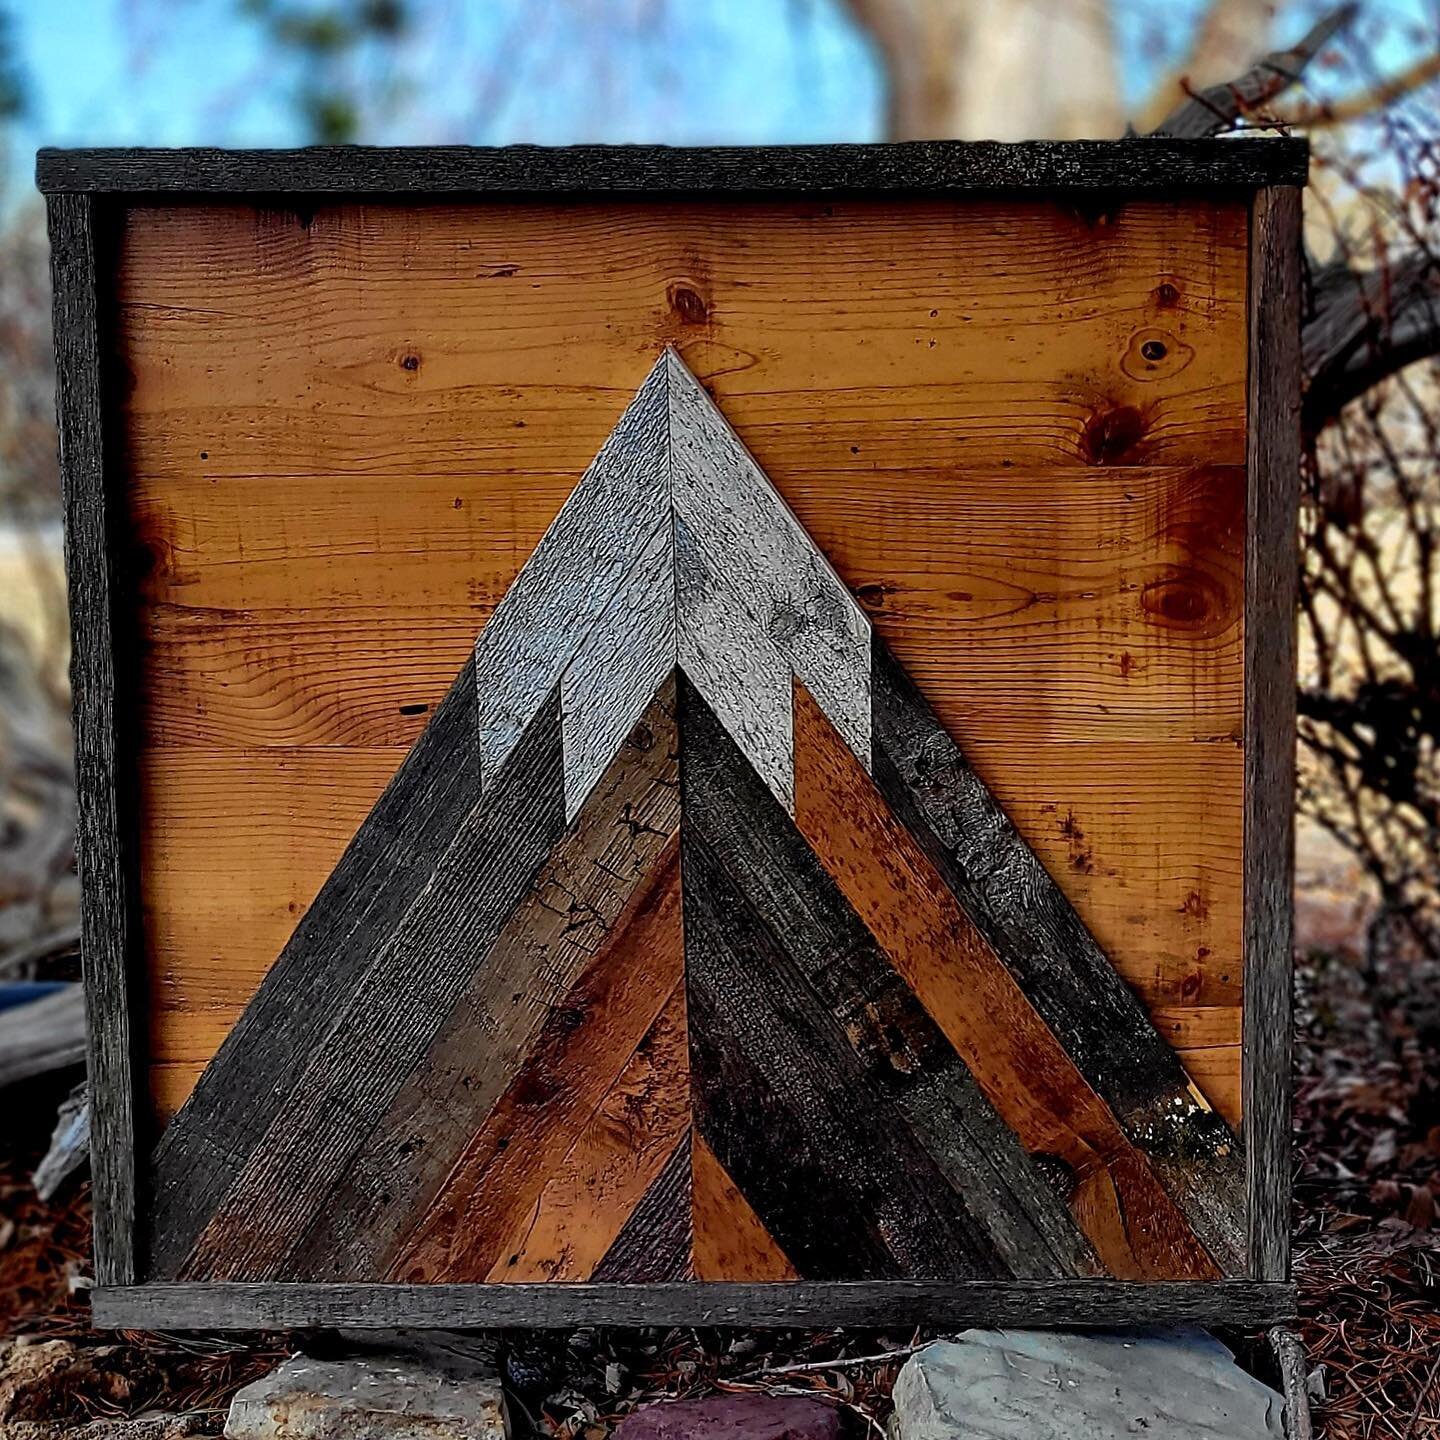 You know that spot on your wall you just can&rsquo;t find the perfect piece to fill? Red&rsquo;s Rustic Signs might be just the booth for you! Visit their booth on May 6 at Fort Missoula to shop their beautiful hand-made rustic wood signs. 

#woodsig